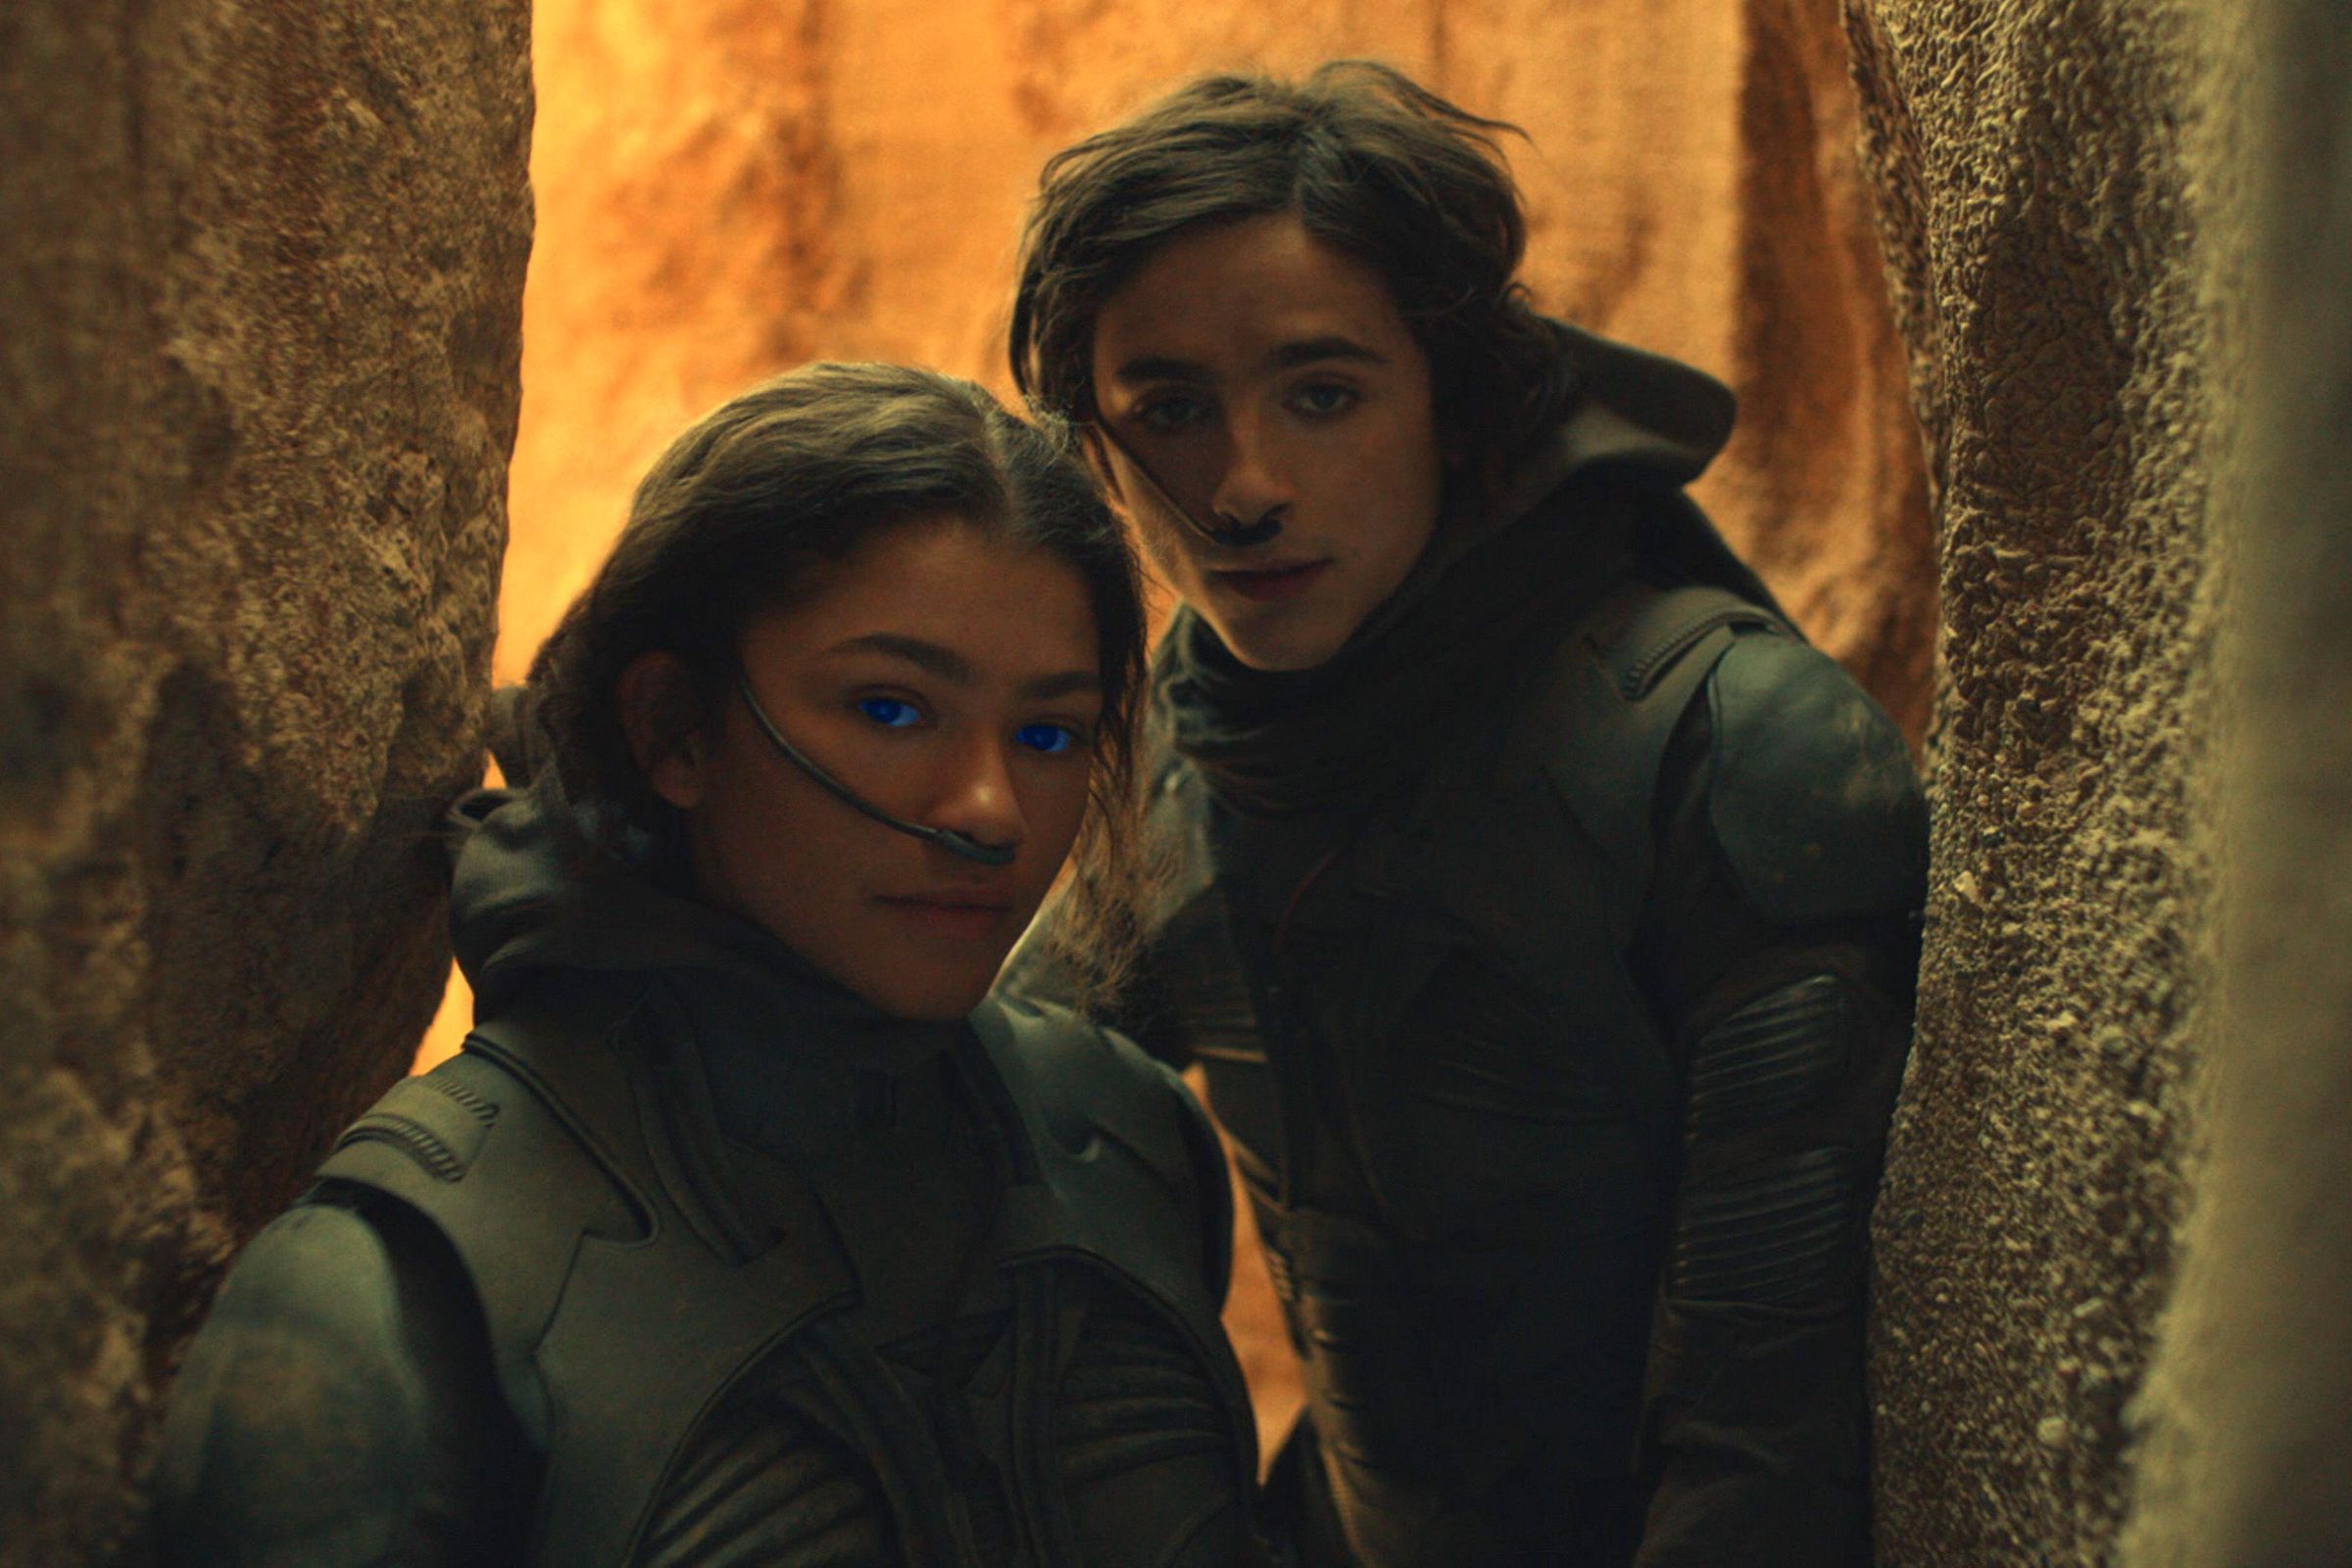 A young woman and a young man standing very close to one another between steep cliff faces. Both are wearing all-black, full-body suits that catch their body moisture, and they also have striking blue eyes.